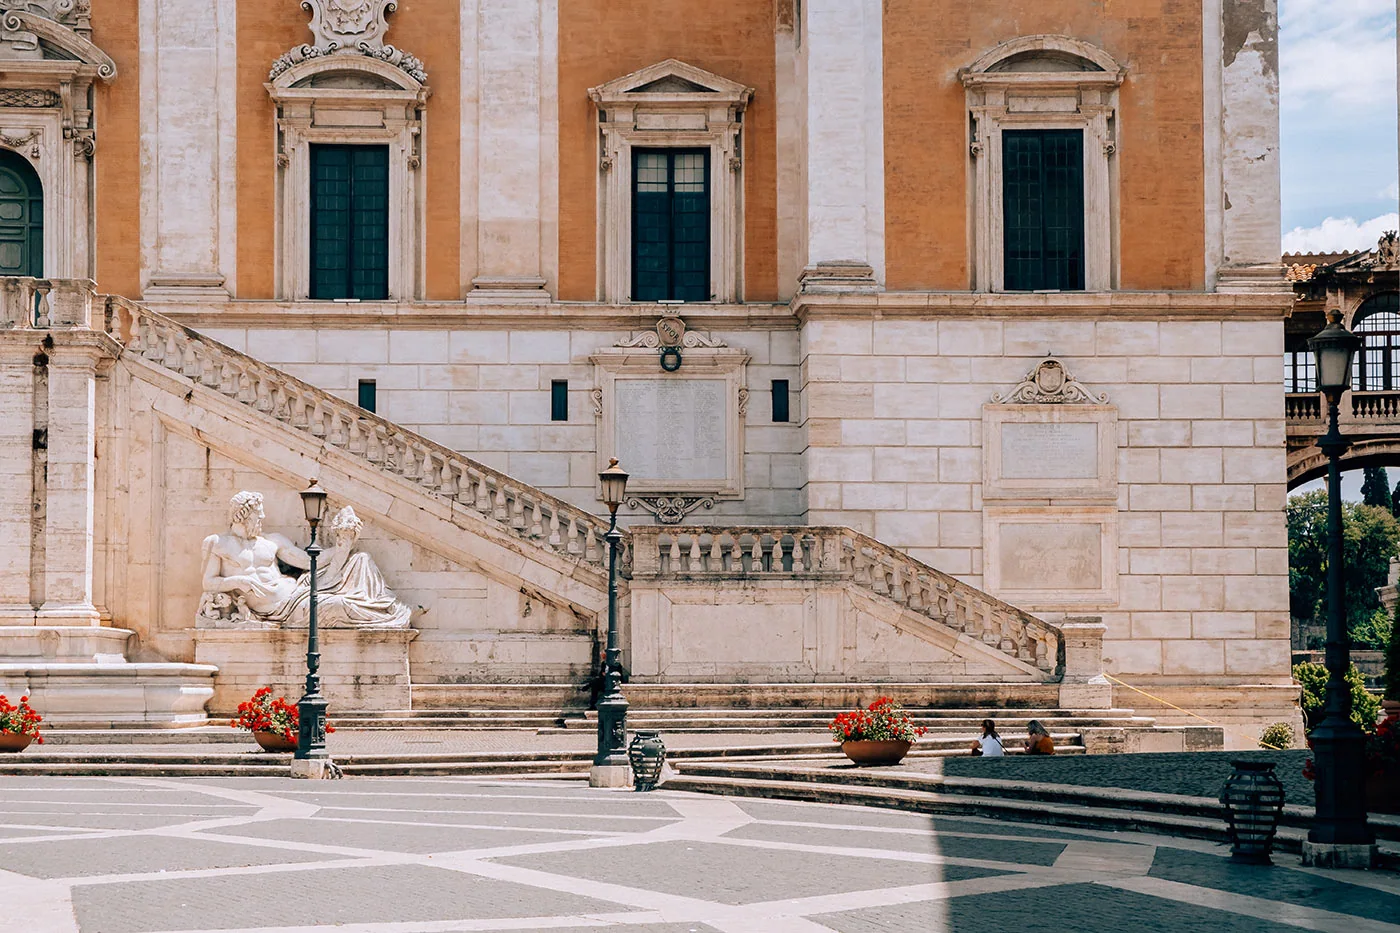 Rome 3 Day Itinerary - Things to do in Rome in 3 days - Il Campidoglio